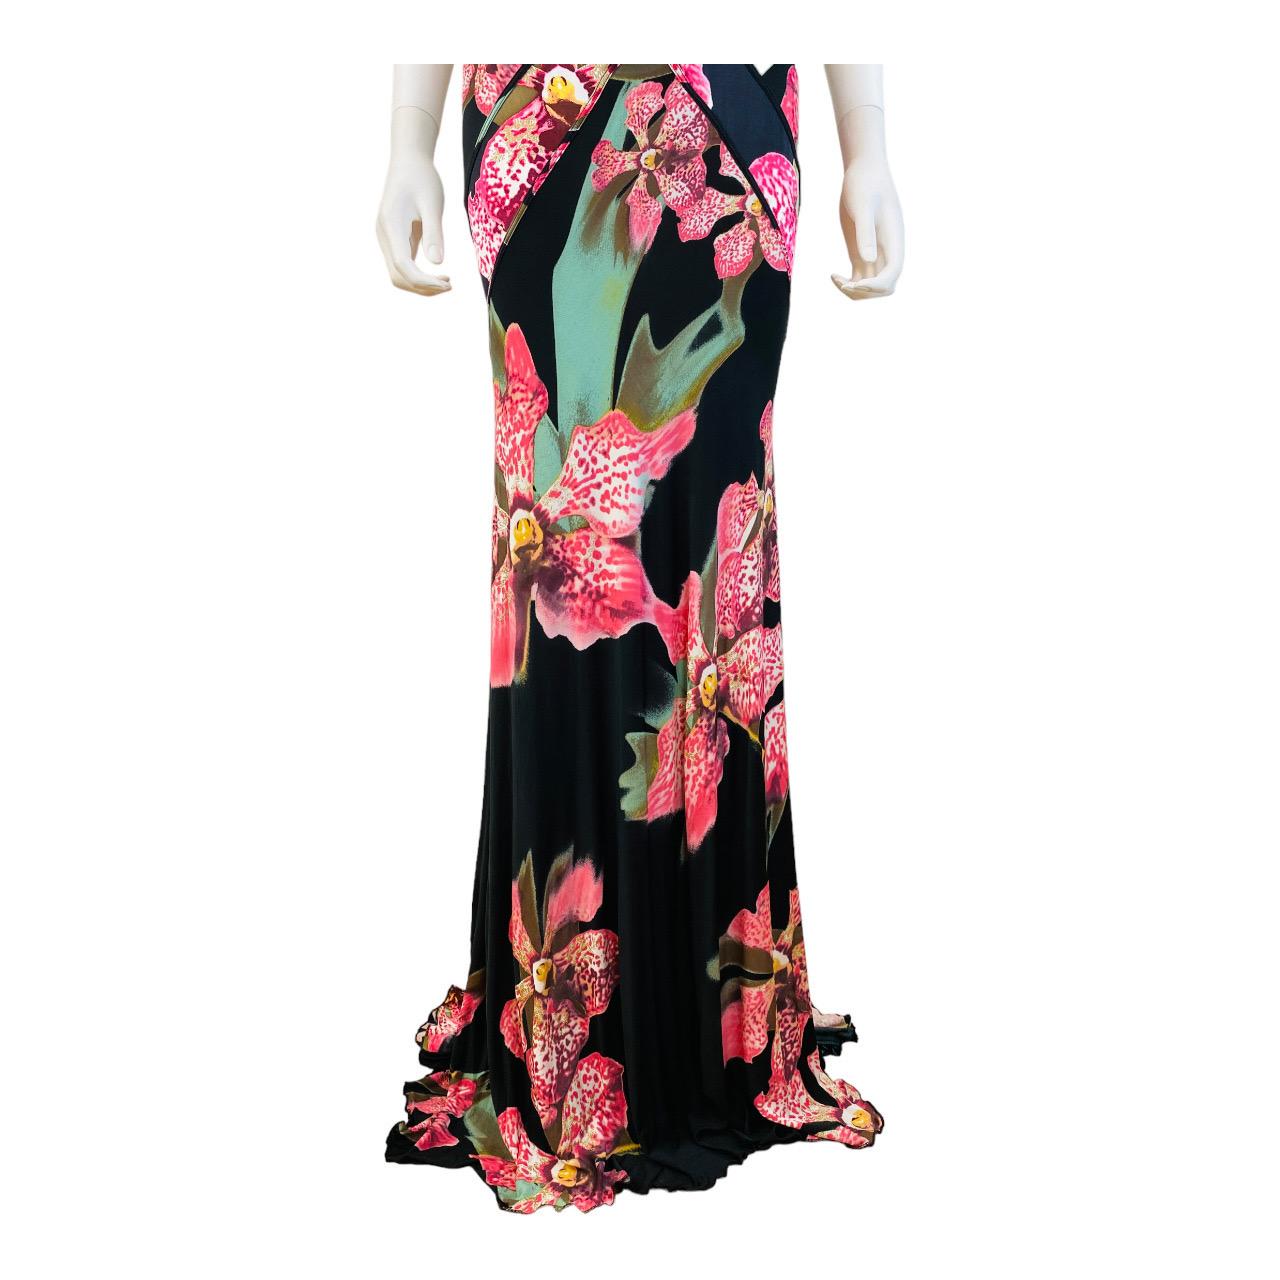 Vintage Roberto Cavalli F/W 2004 Floral Orchid Print Pink + Black Dress Gown For Sale 3